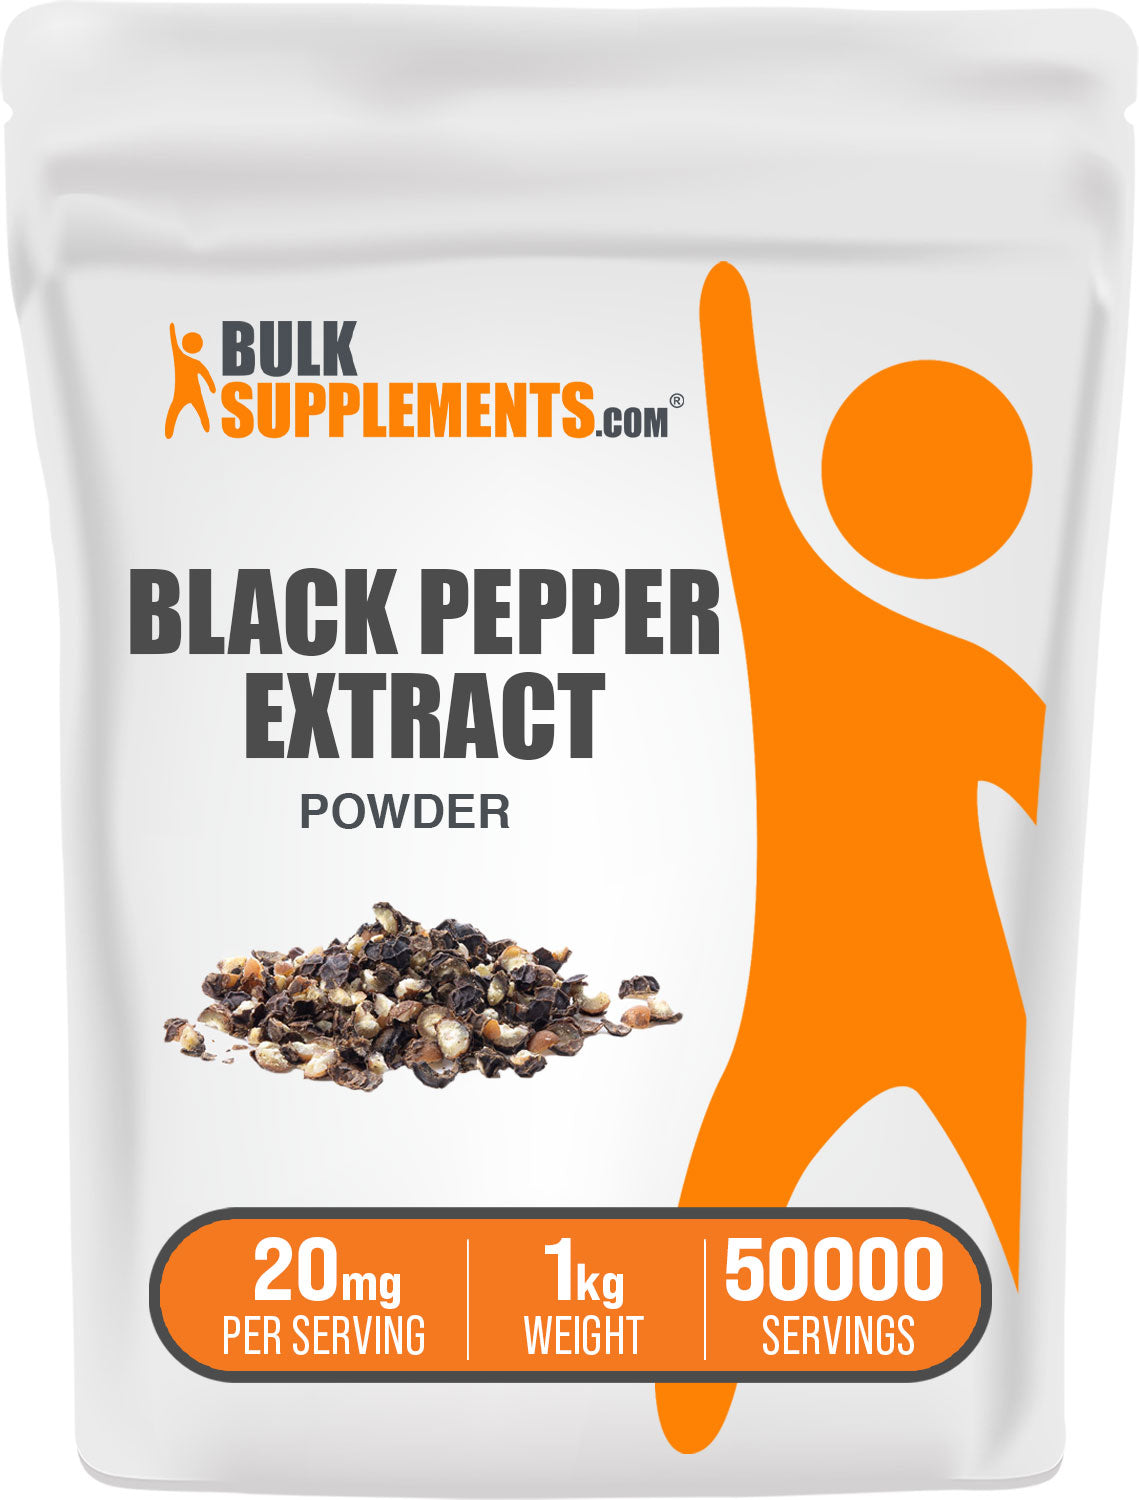 1kg bag of black pepper extract